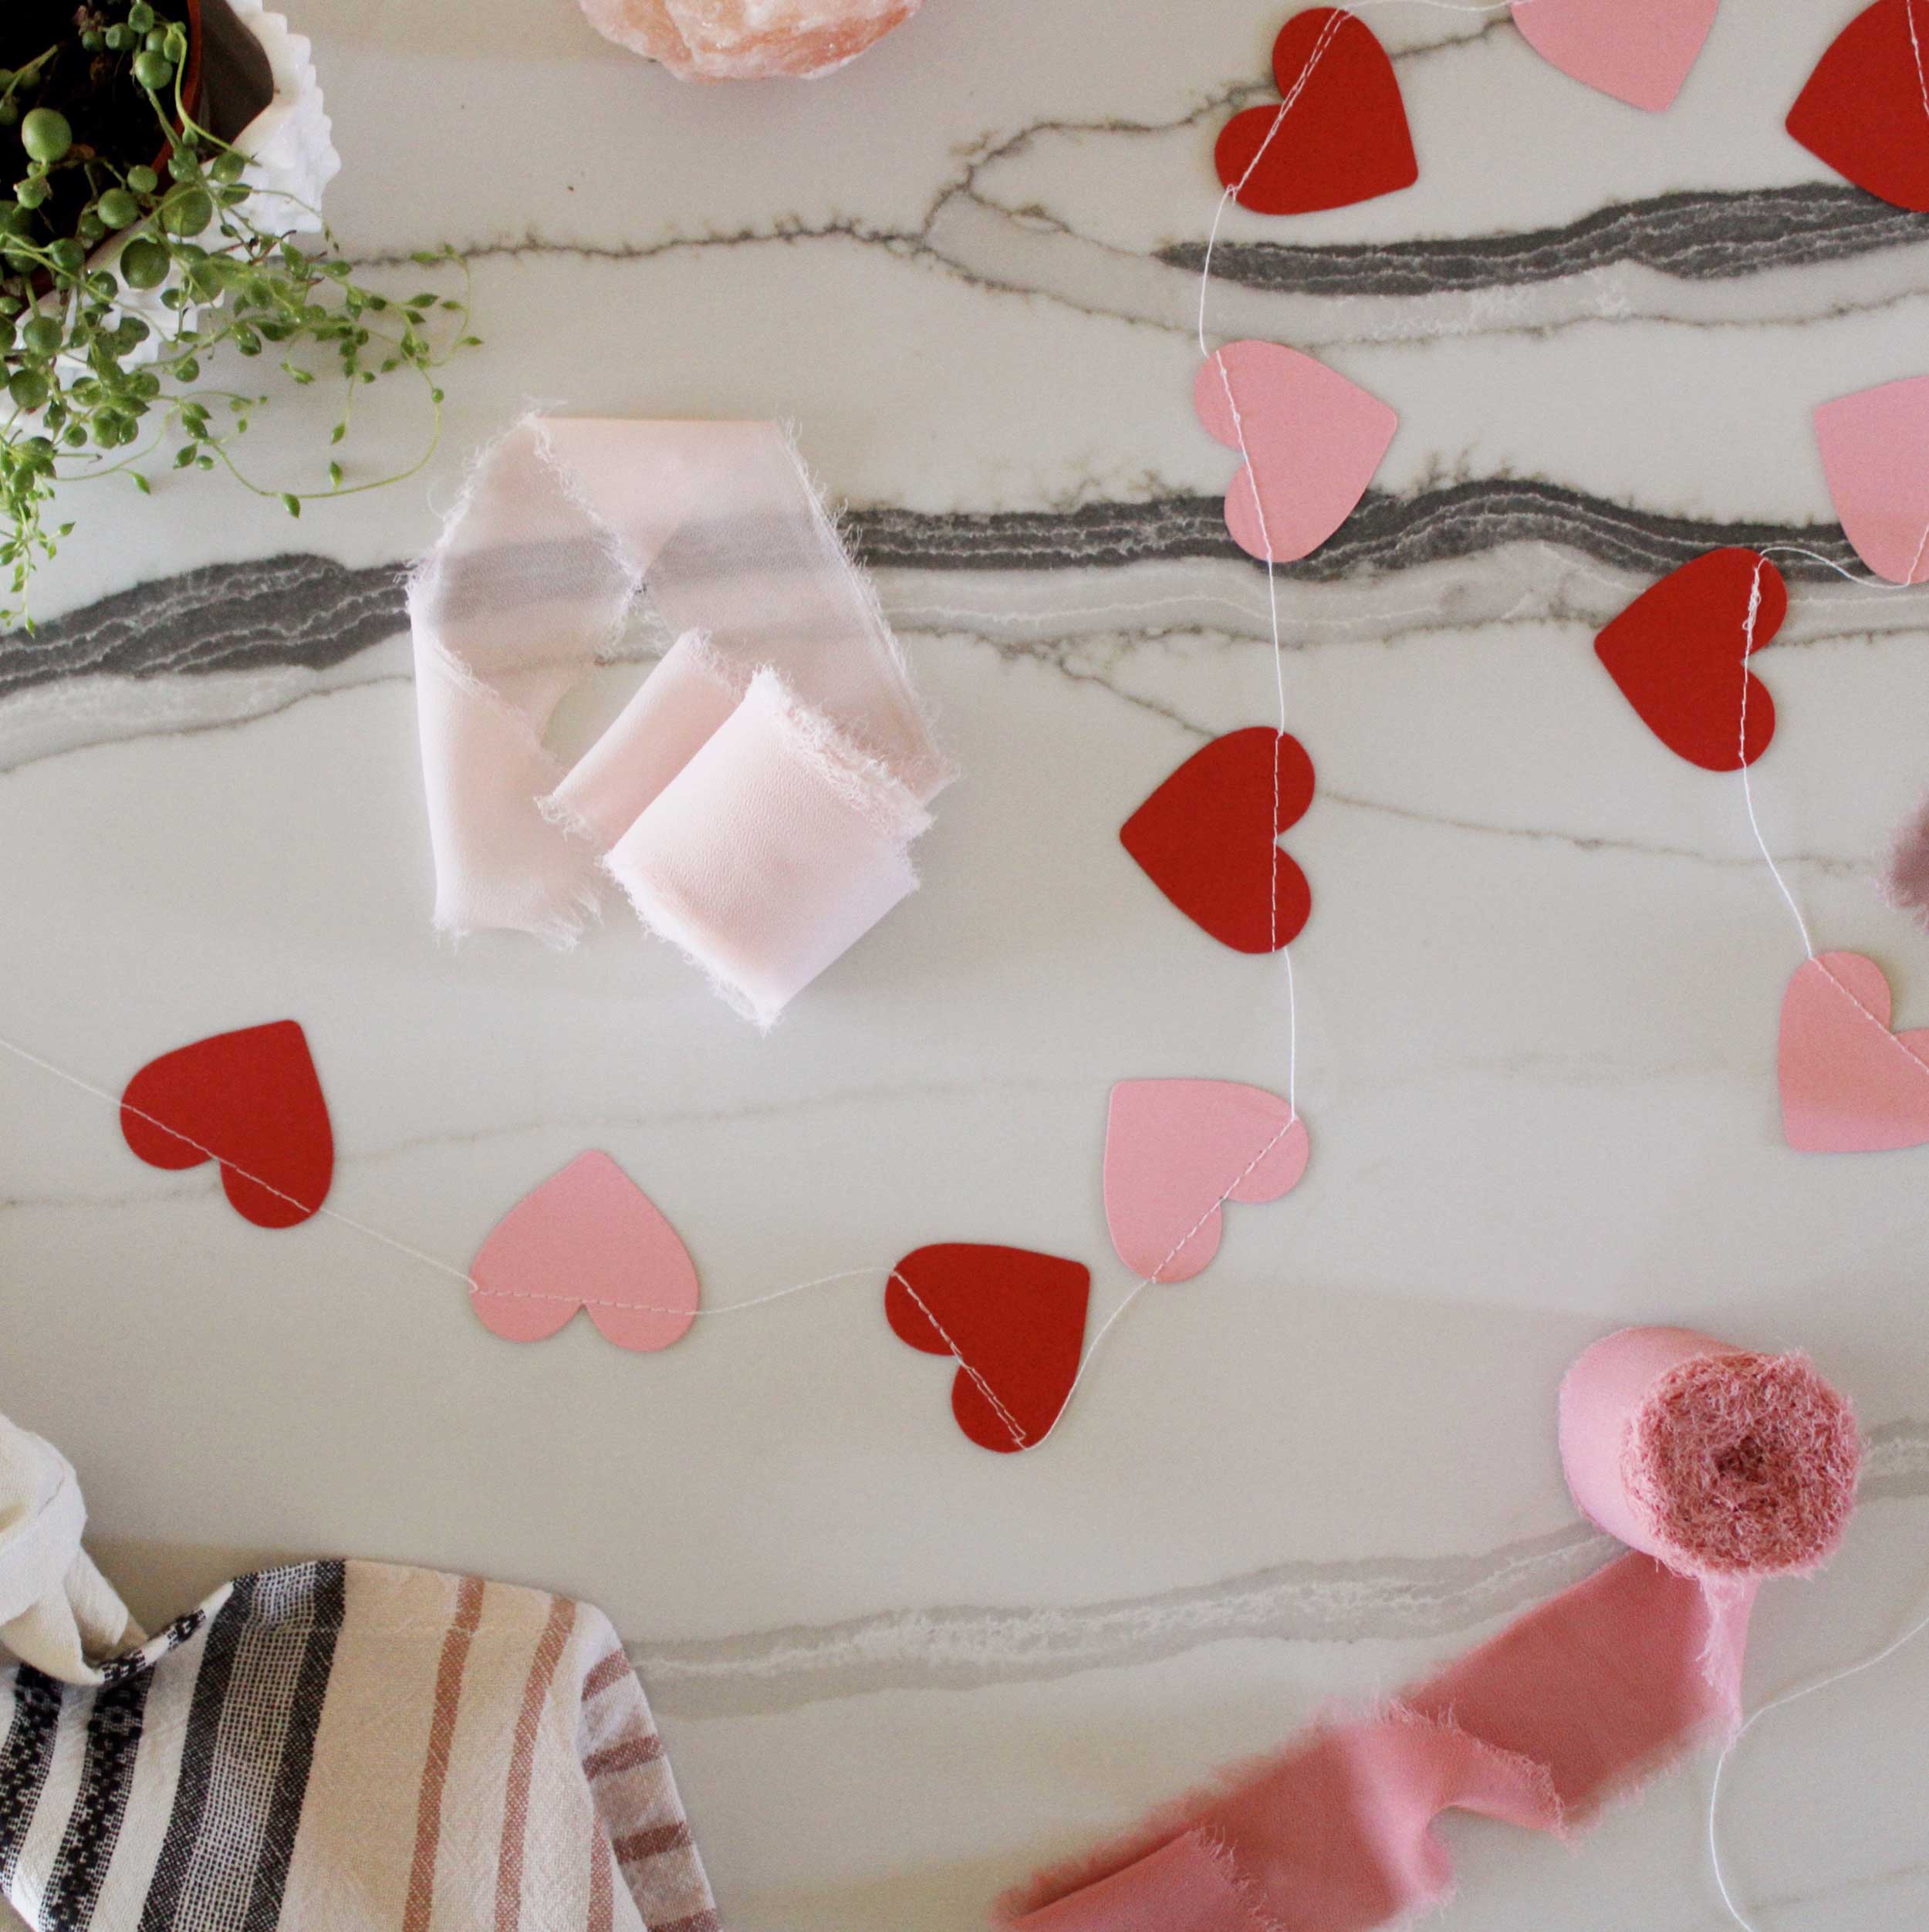 Creating Memories on Valentine’s Day for Kids